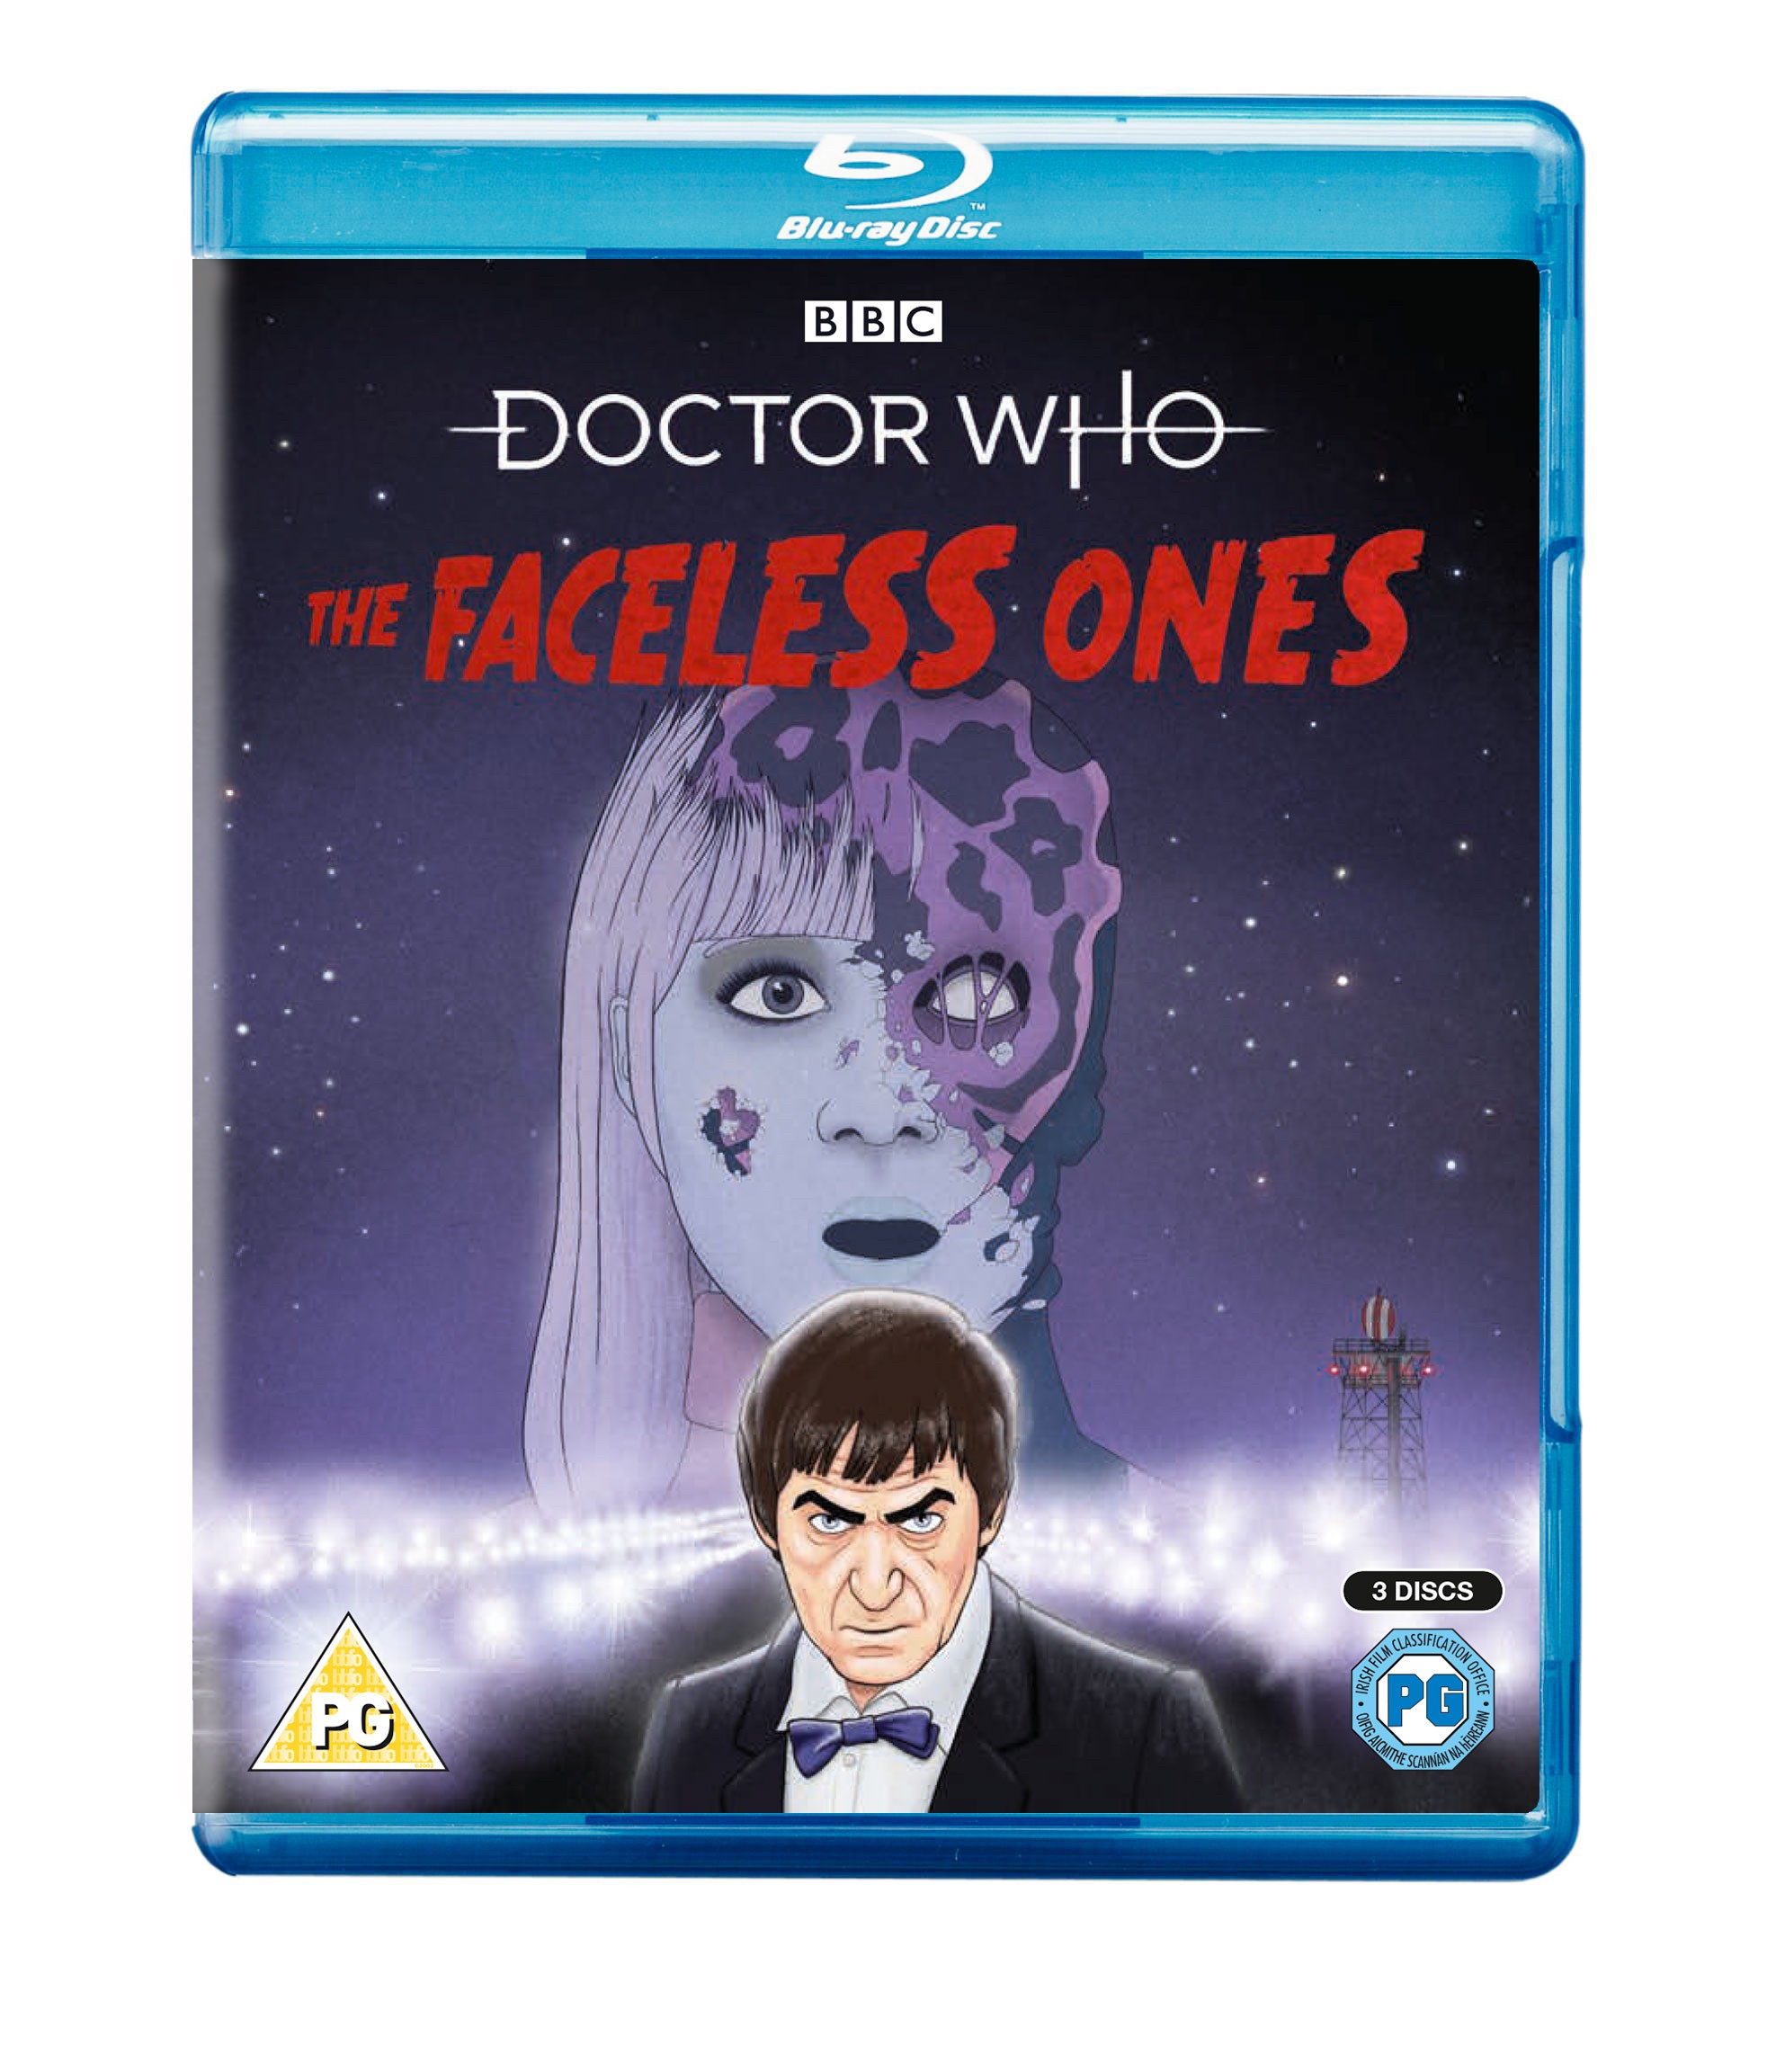 The Faceless Ones Blu-Ray